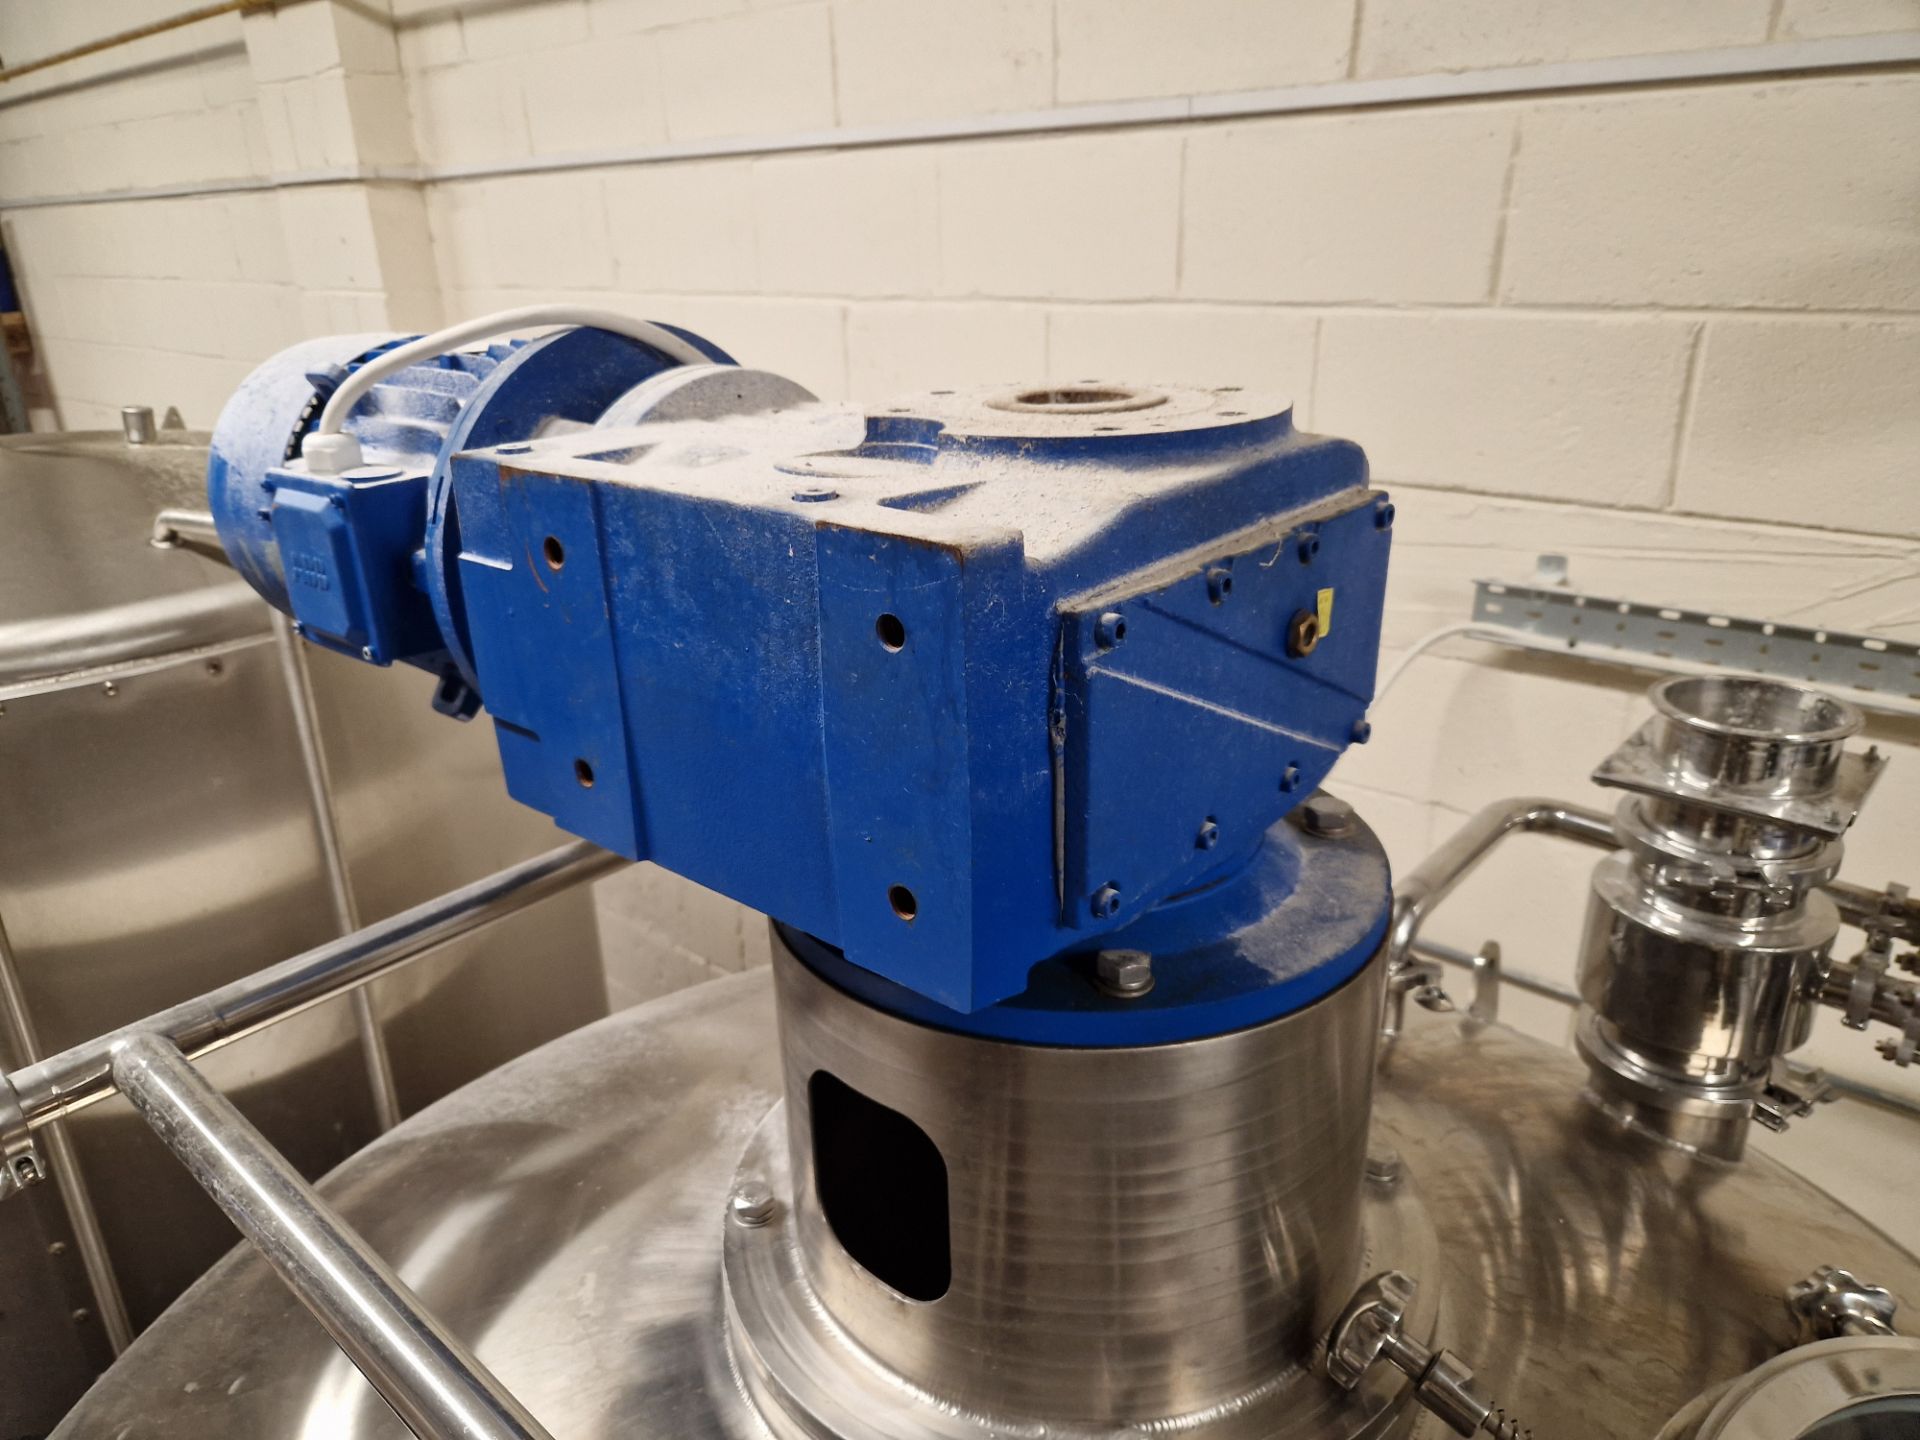 Willis European Ltd 15BBL Mash Tun, serial no. KB-202000512001, year of manufacture 2020, with - Image 9 of 14